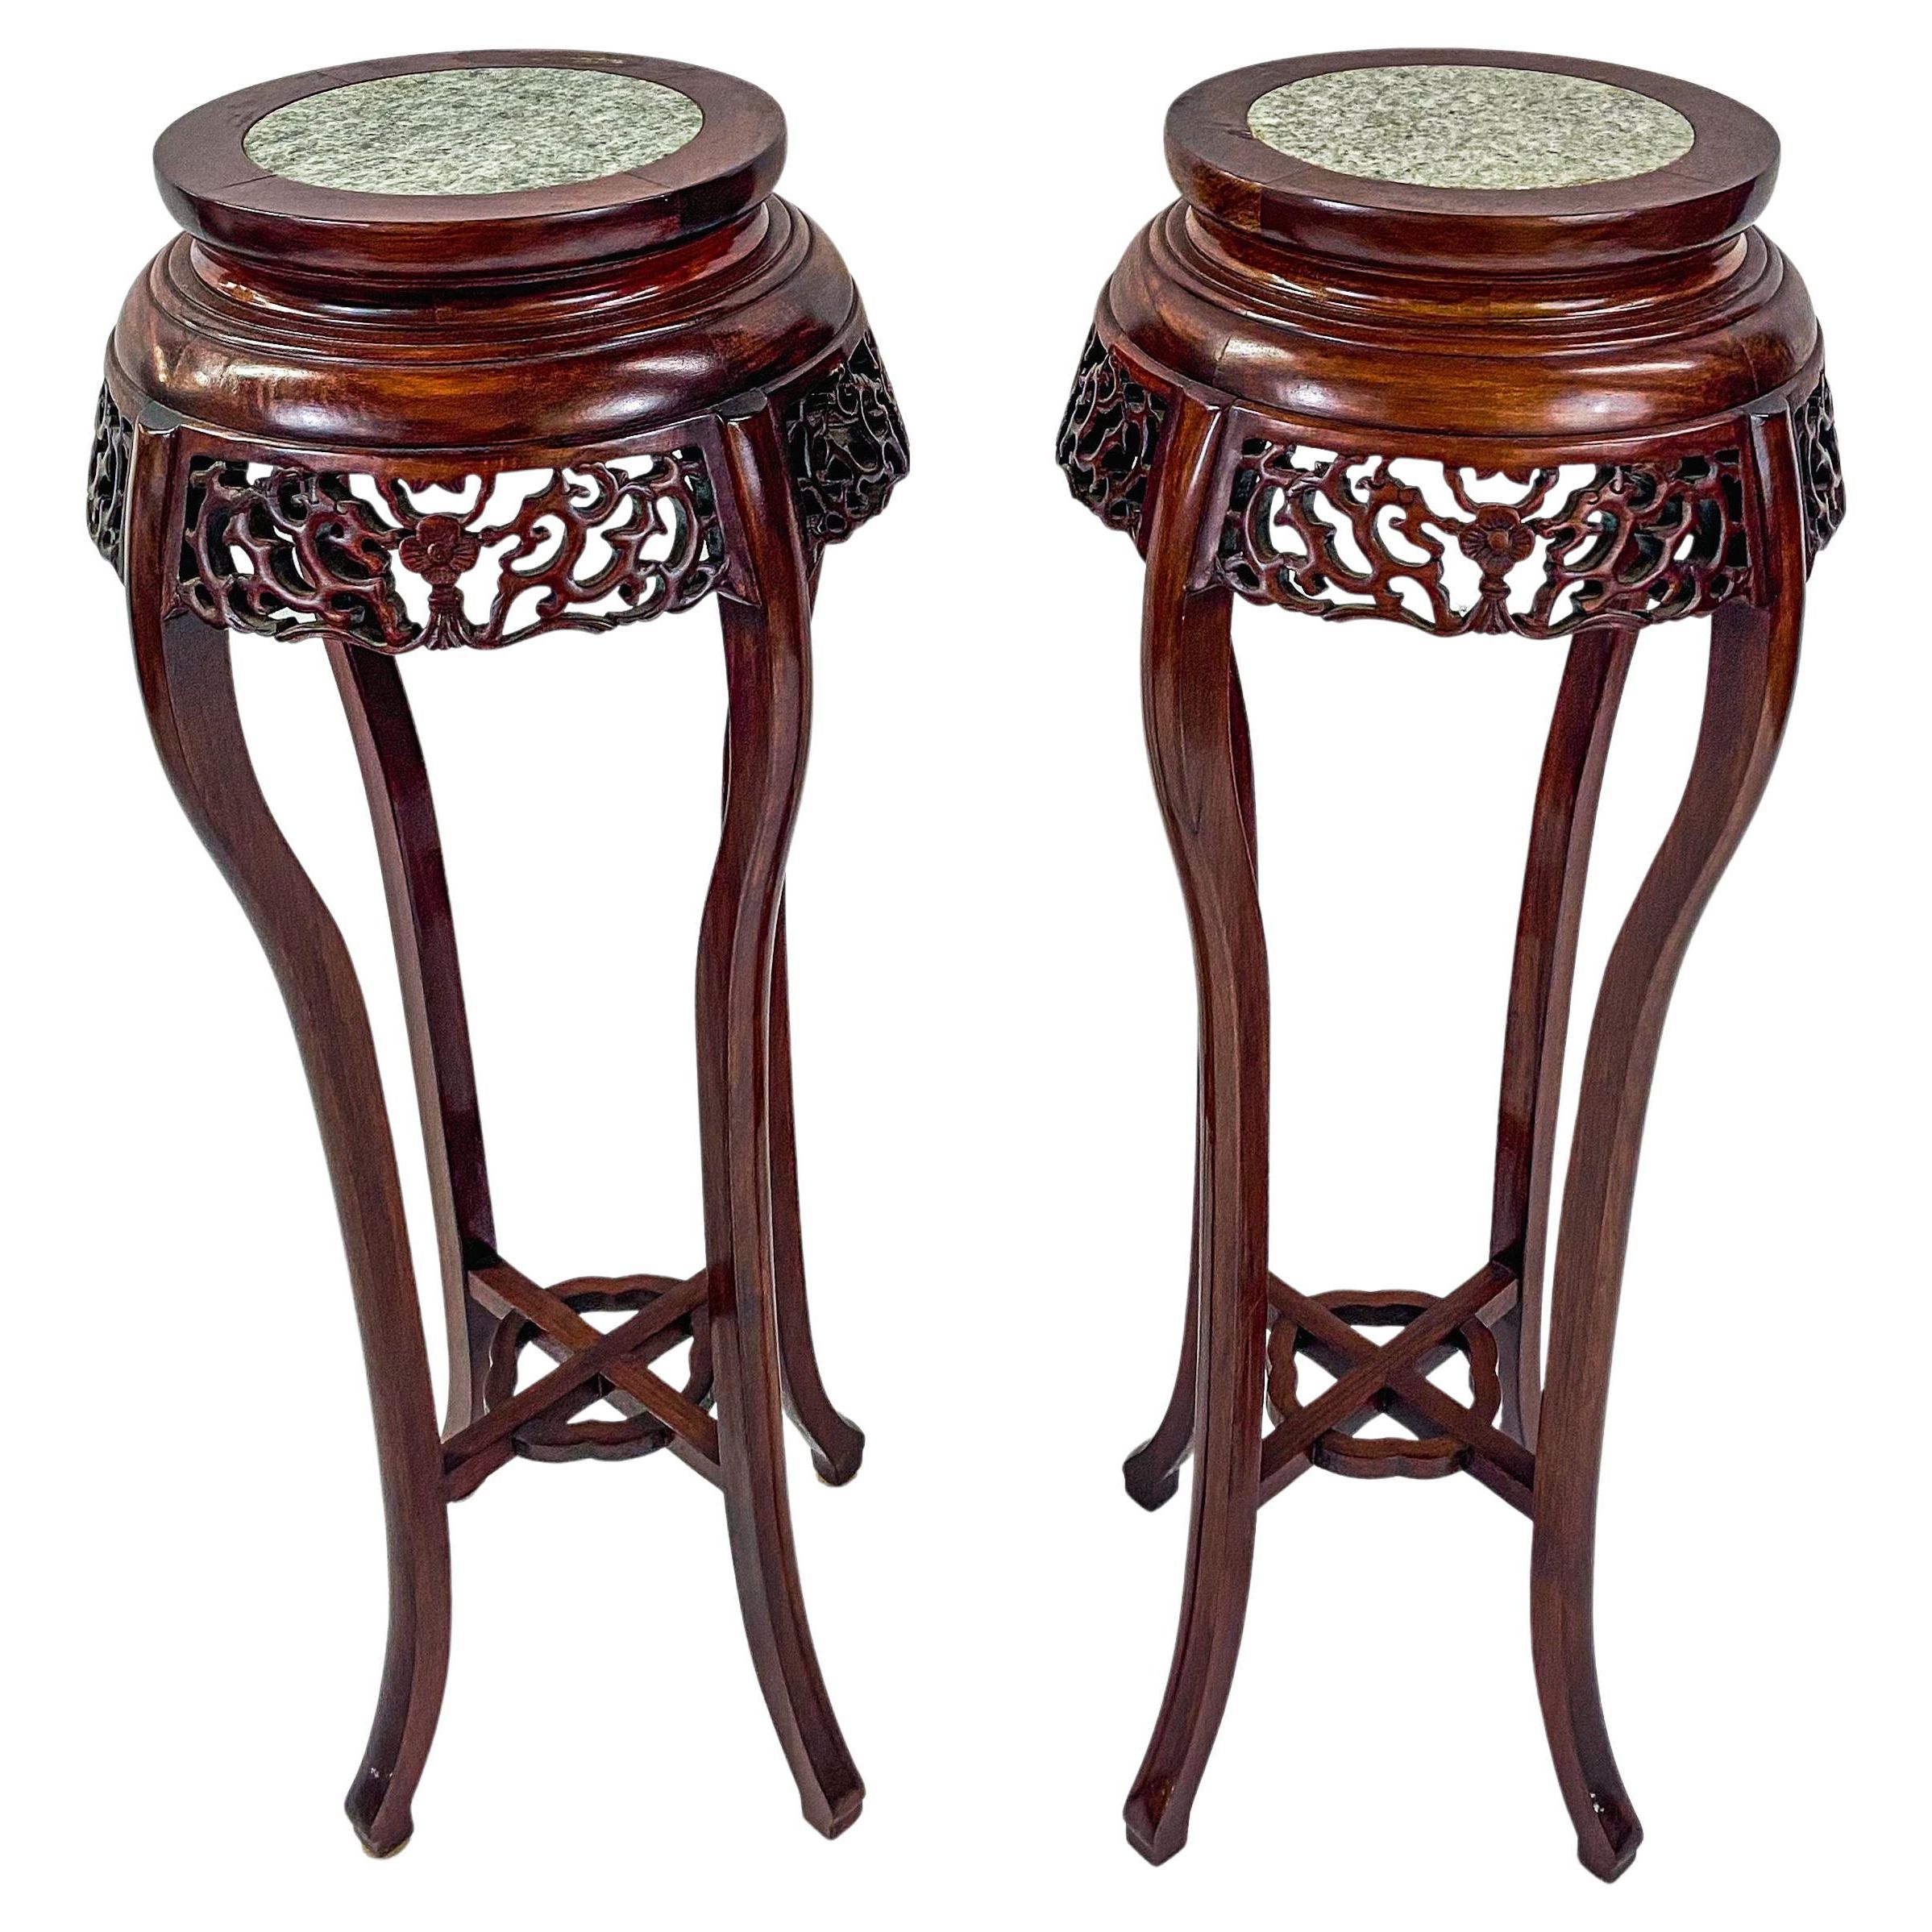 Carved Plant Stands Pertaining To Newest Oriental Chinese Carved Rosewood Pedestal, Plant Stand With Granite Top, A  Pair For Sale At 1stdibs (View 5 of 10)